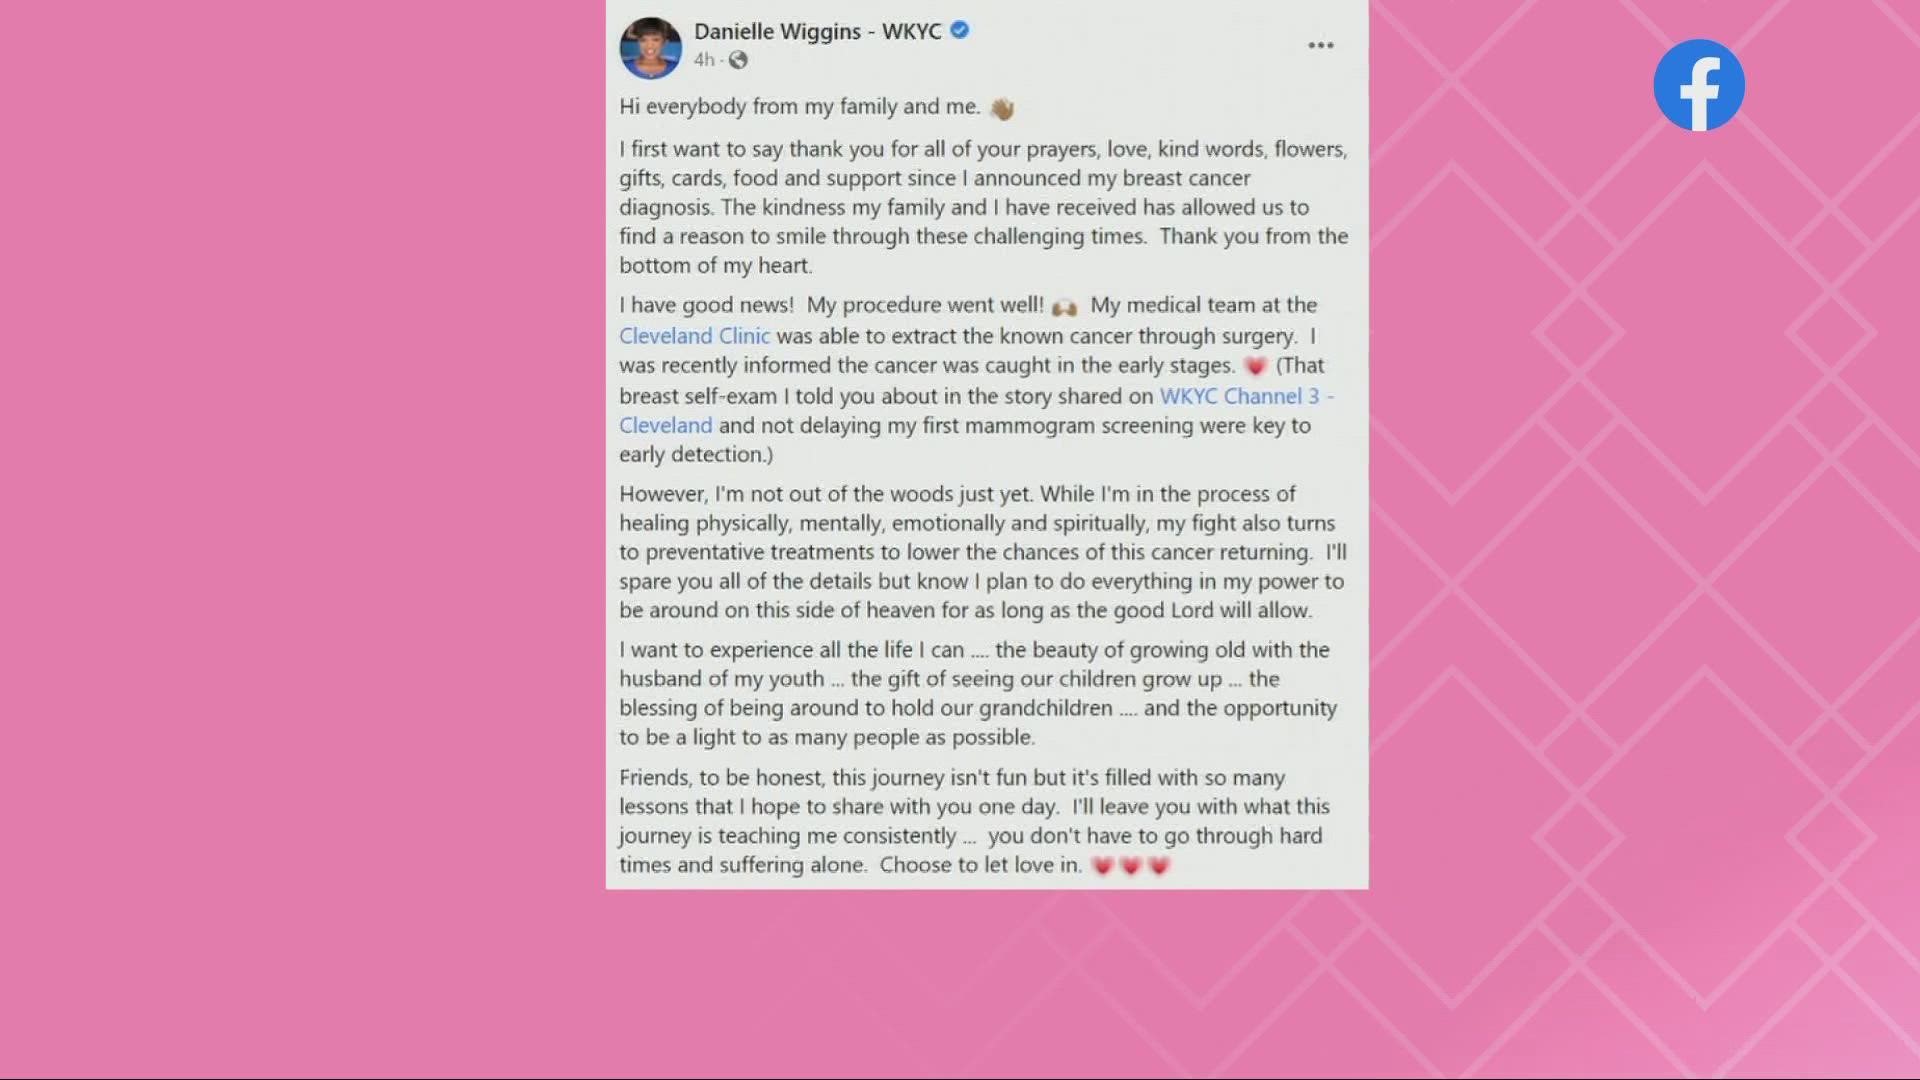 3News' Danielle Wiggins shared a message filled with gratitude after undergoing surgery for breast cancer.